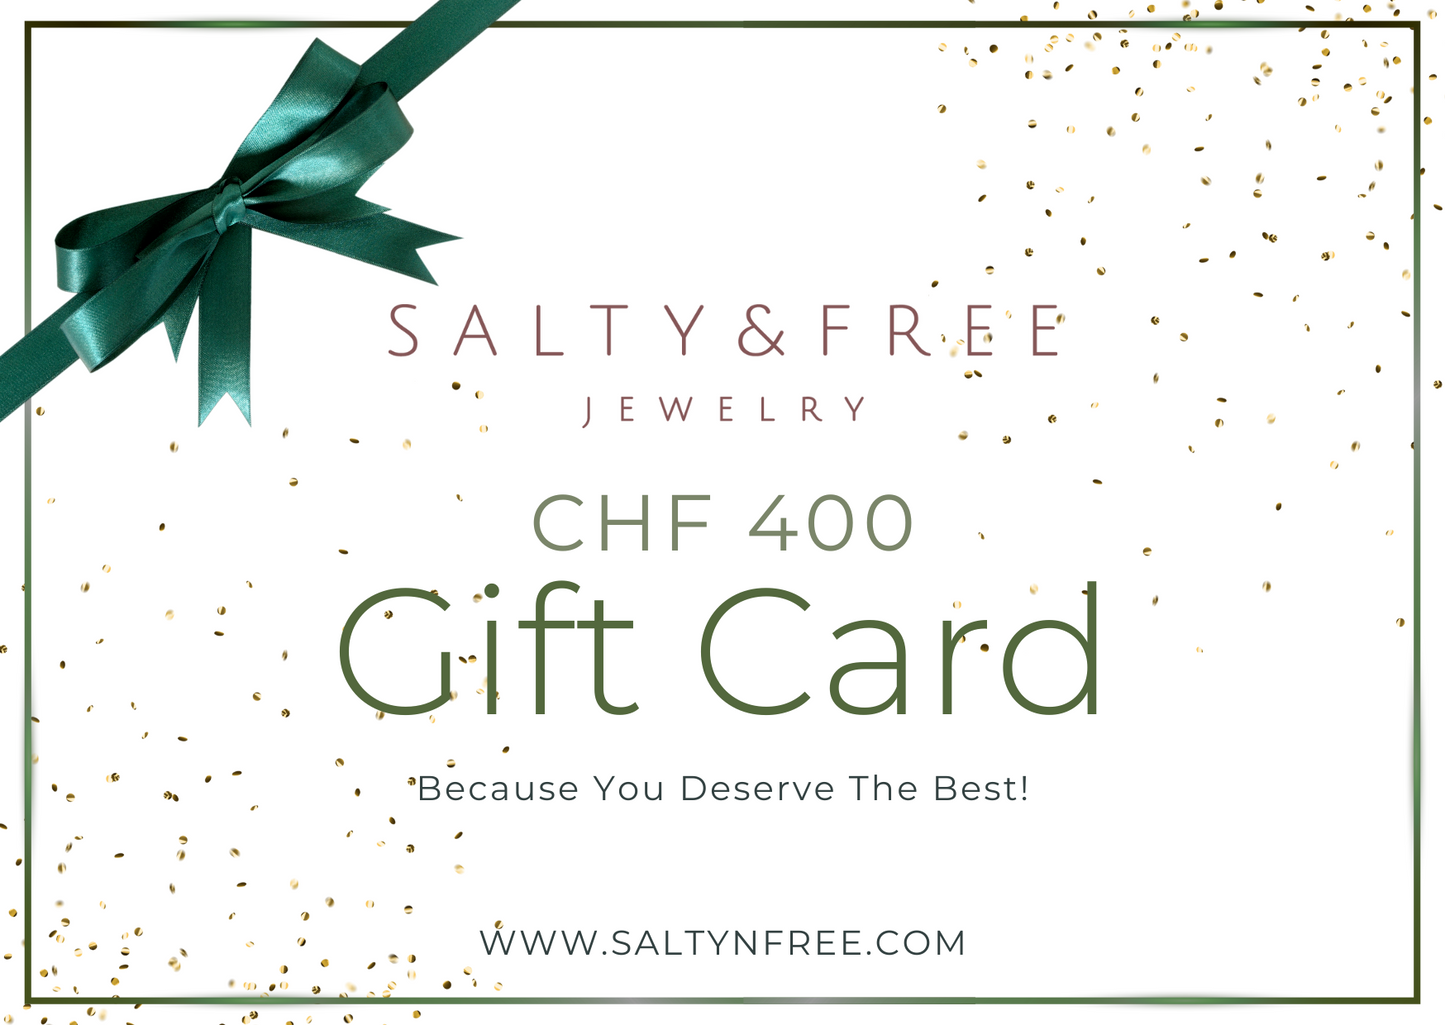 Salty & Free Gift Card "Because You Deserve The Best!"